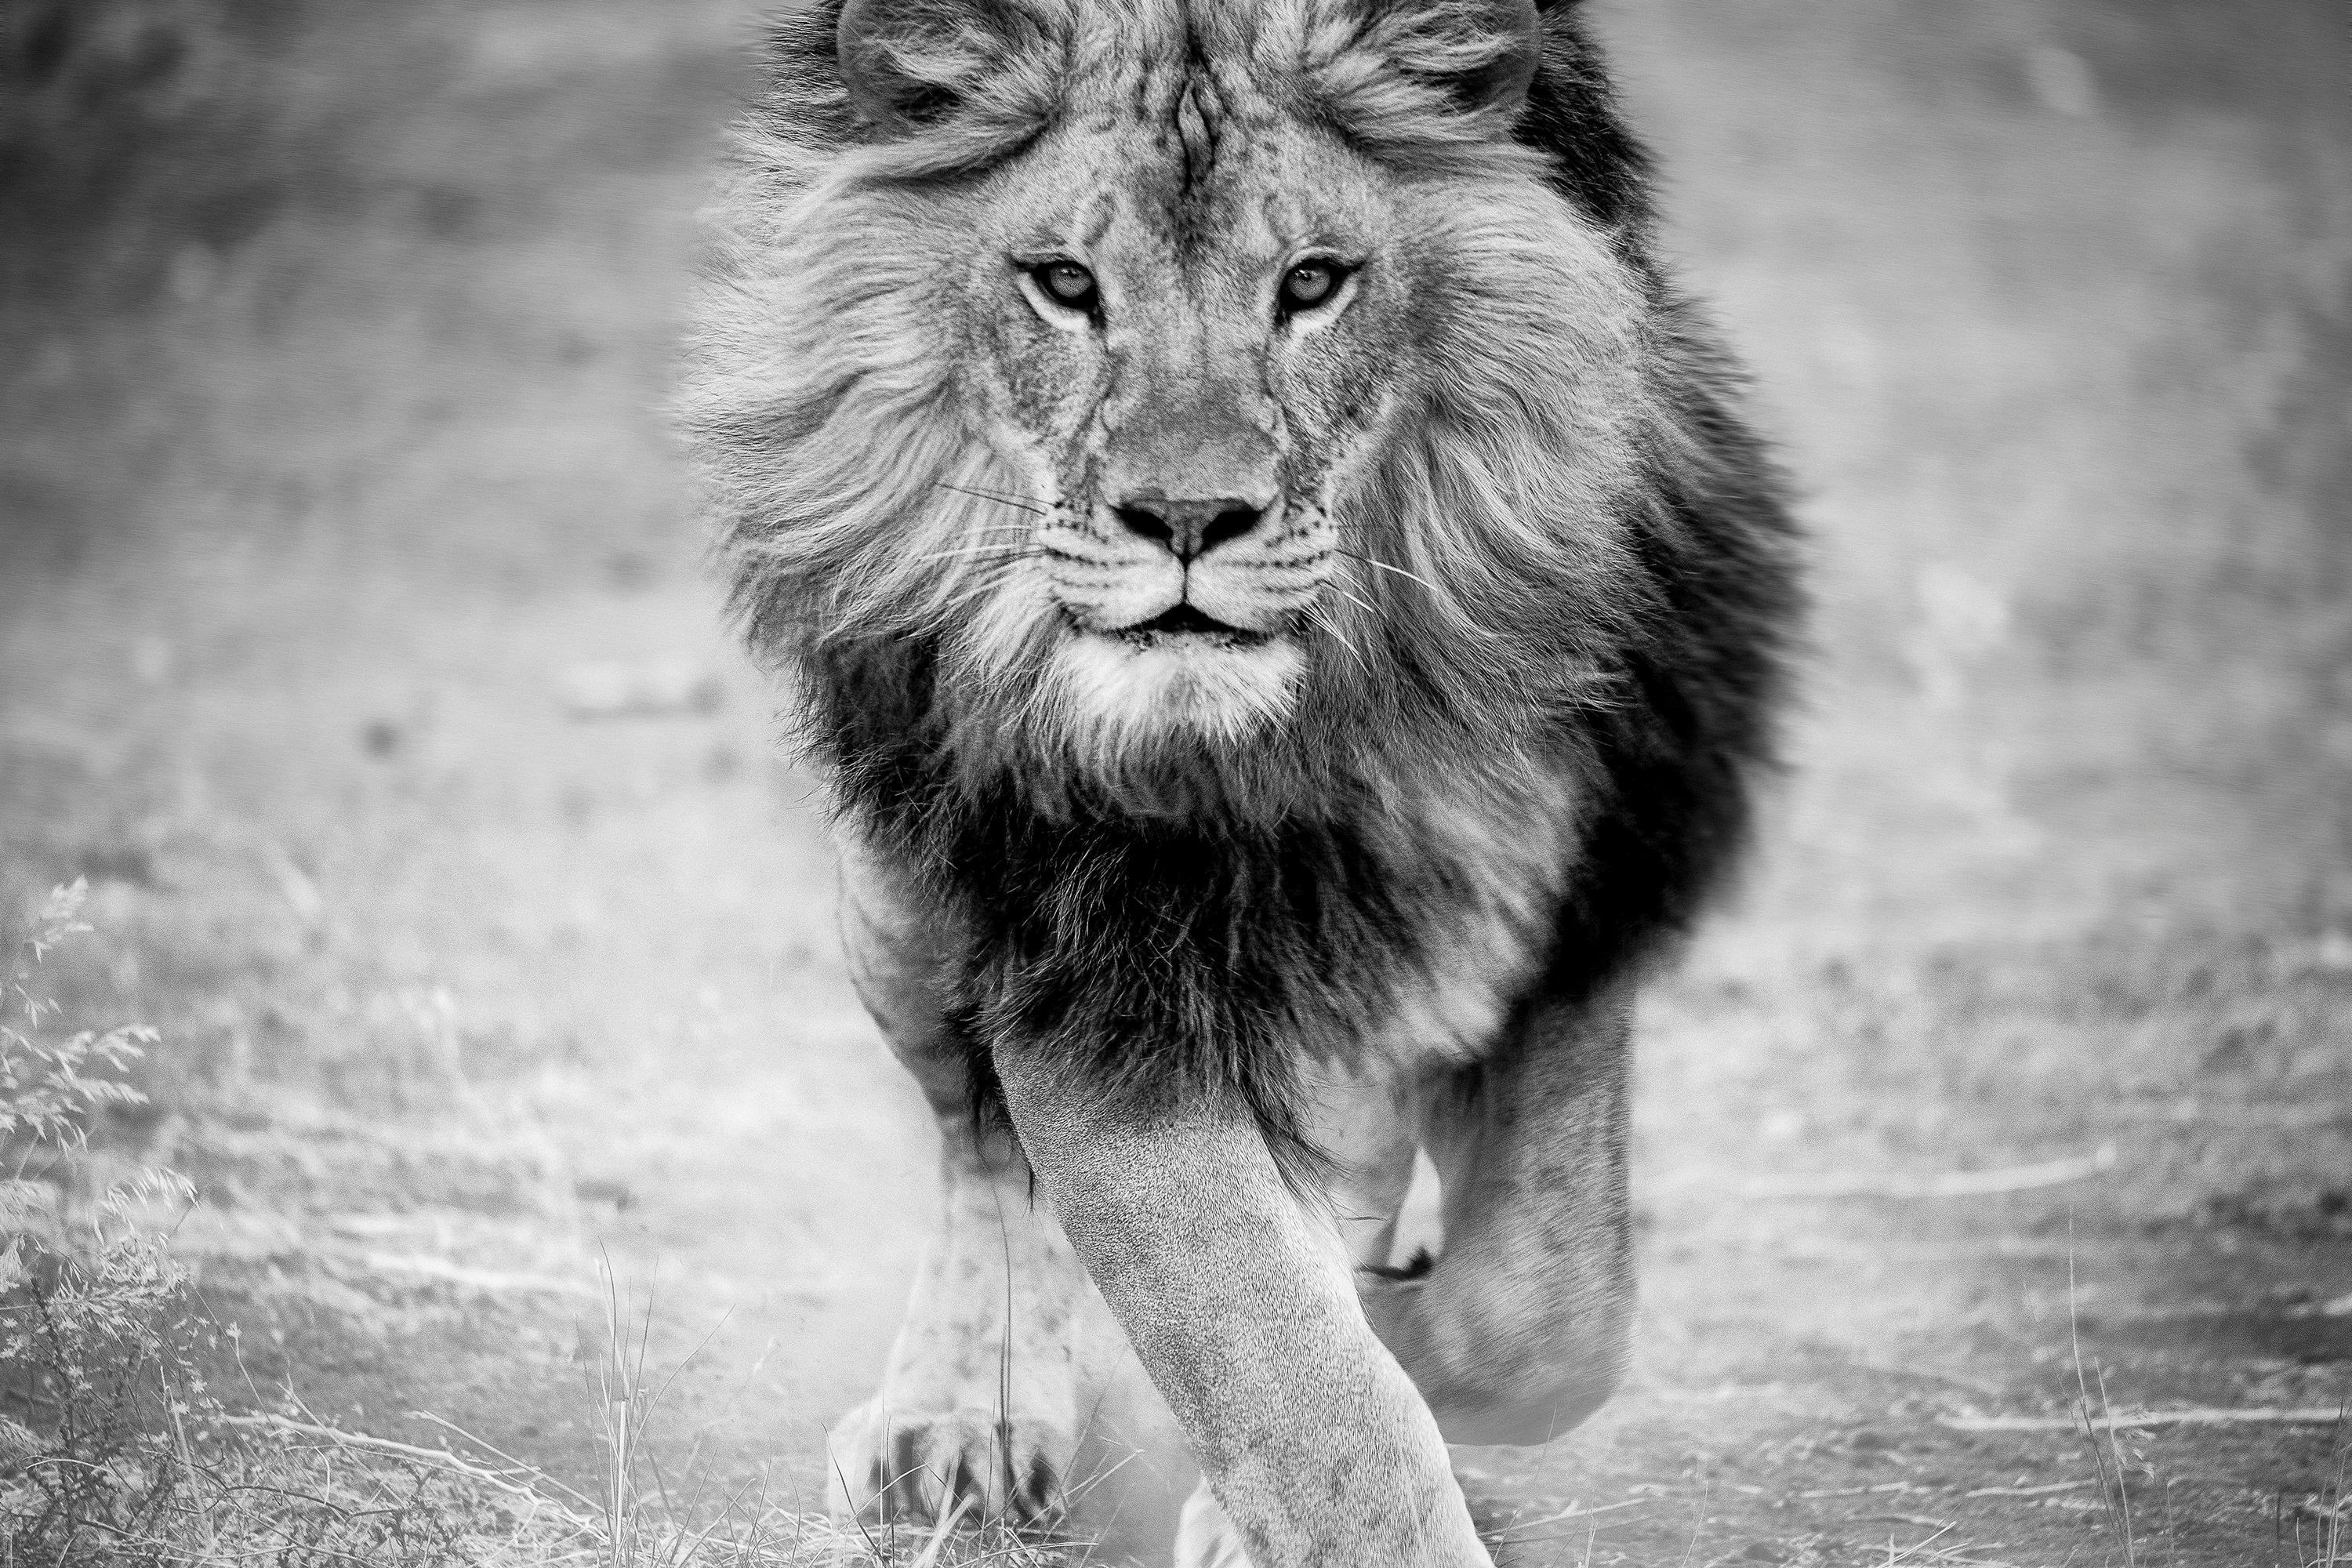 Shane Russeck Black and White Photograph - 1stdibs SPECIAL PRICE "Panthera Leo" - 36x48  Black & White Photography, Lion 